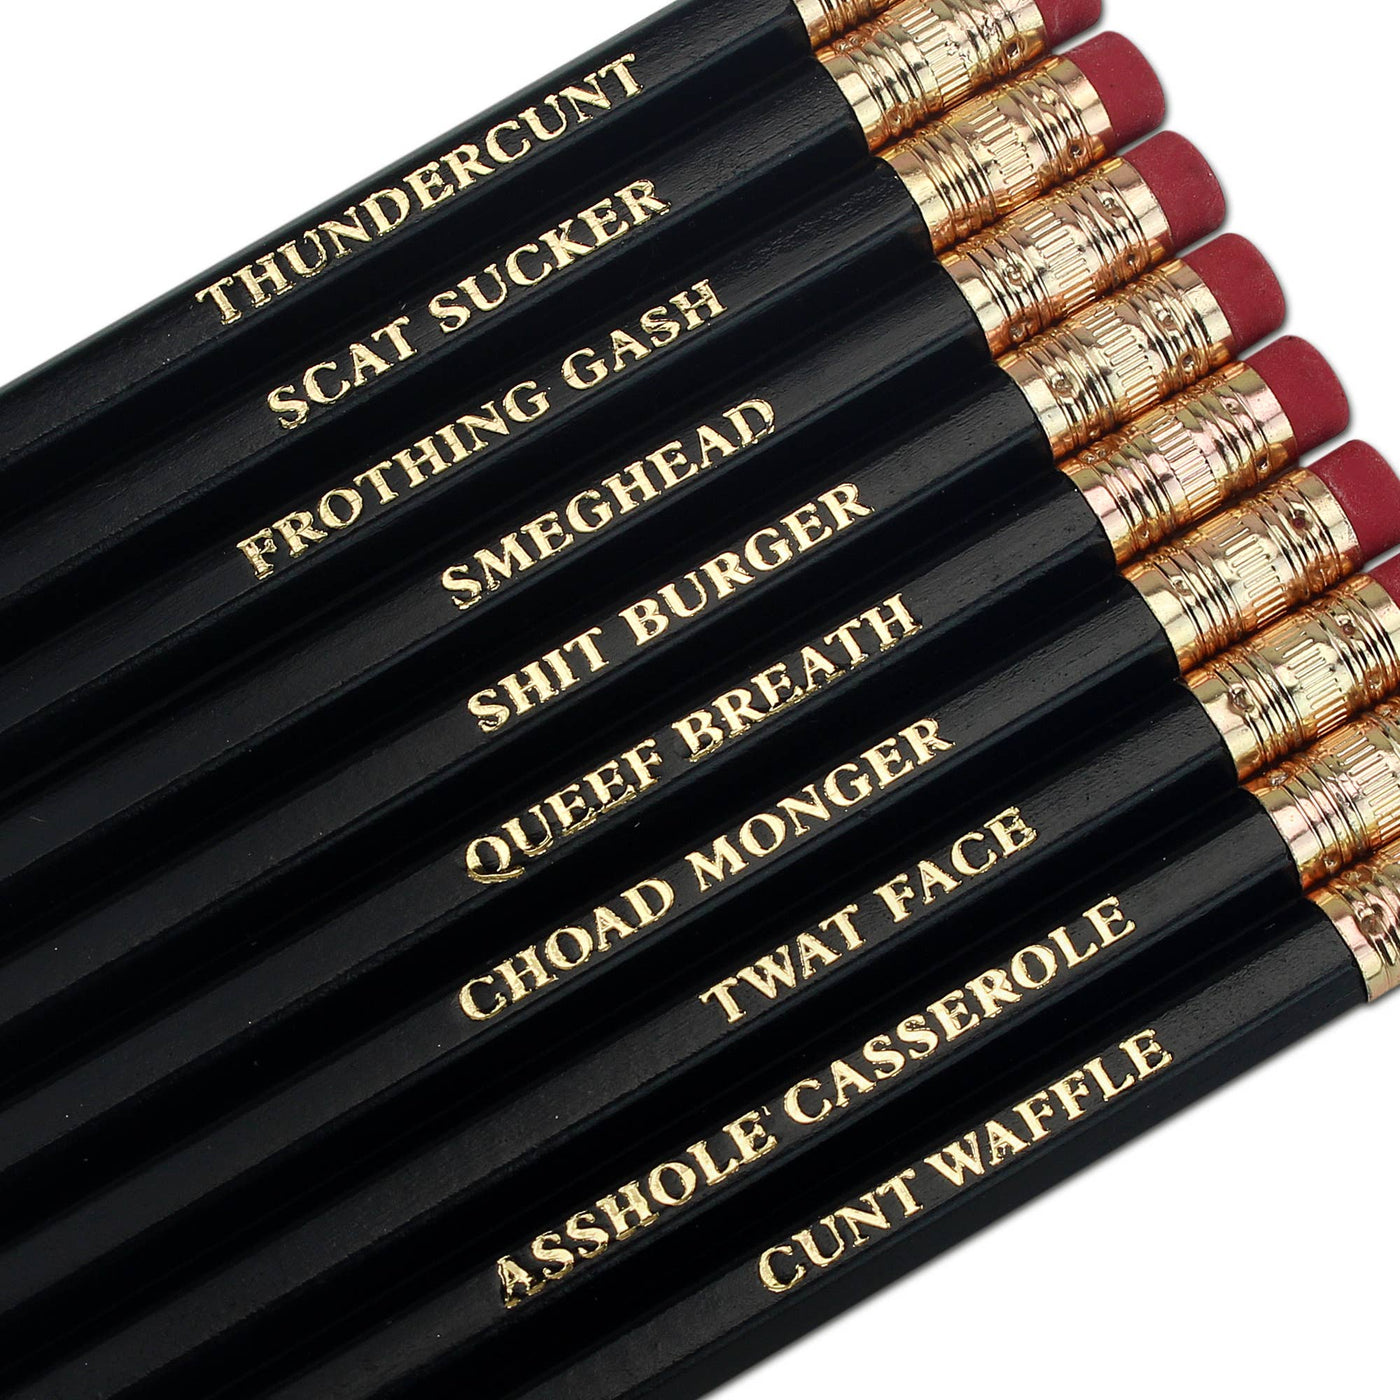 Wickedly Offensive Pencils | Set of 20 Pencils